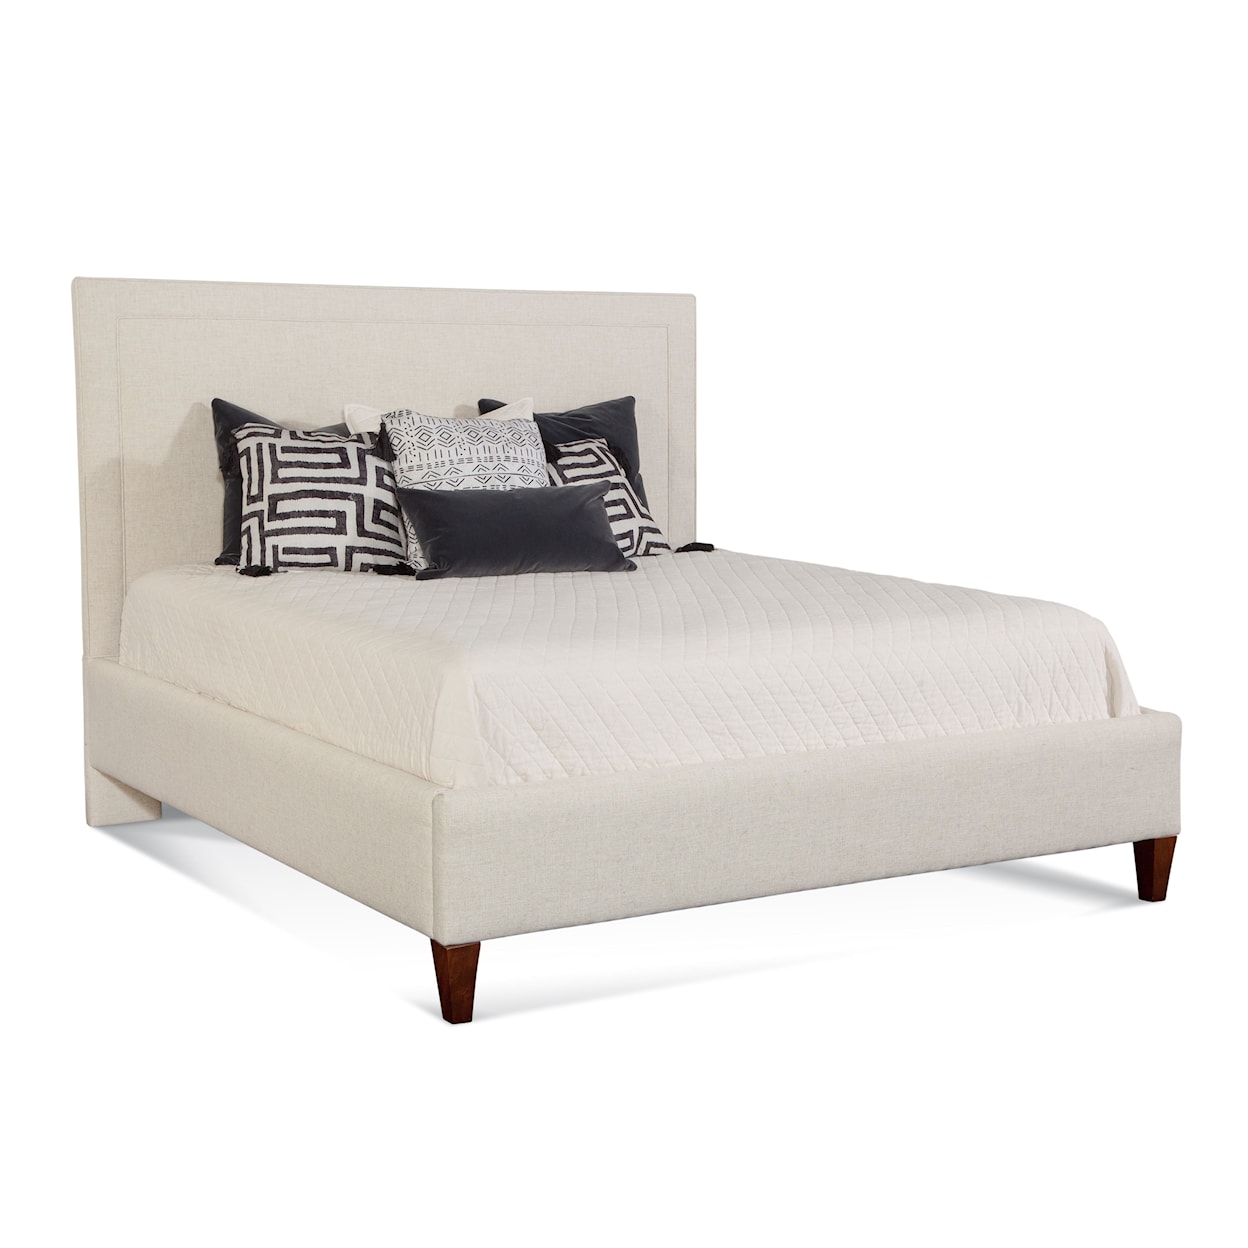 Braxton Culler Emory Queen Bed with Nailhead Trim